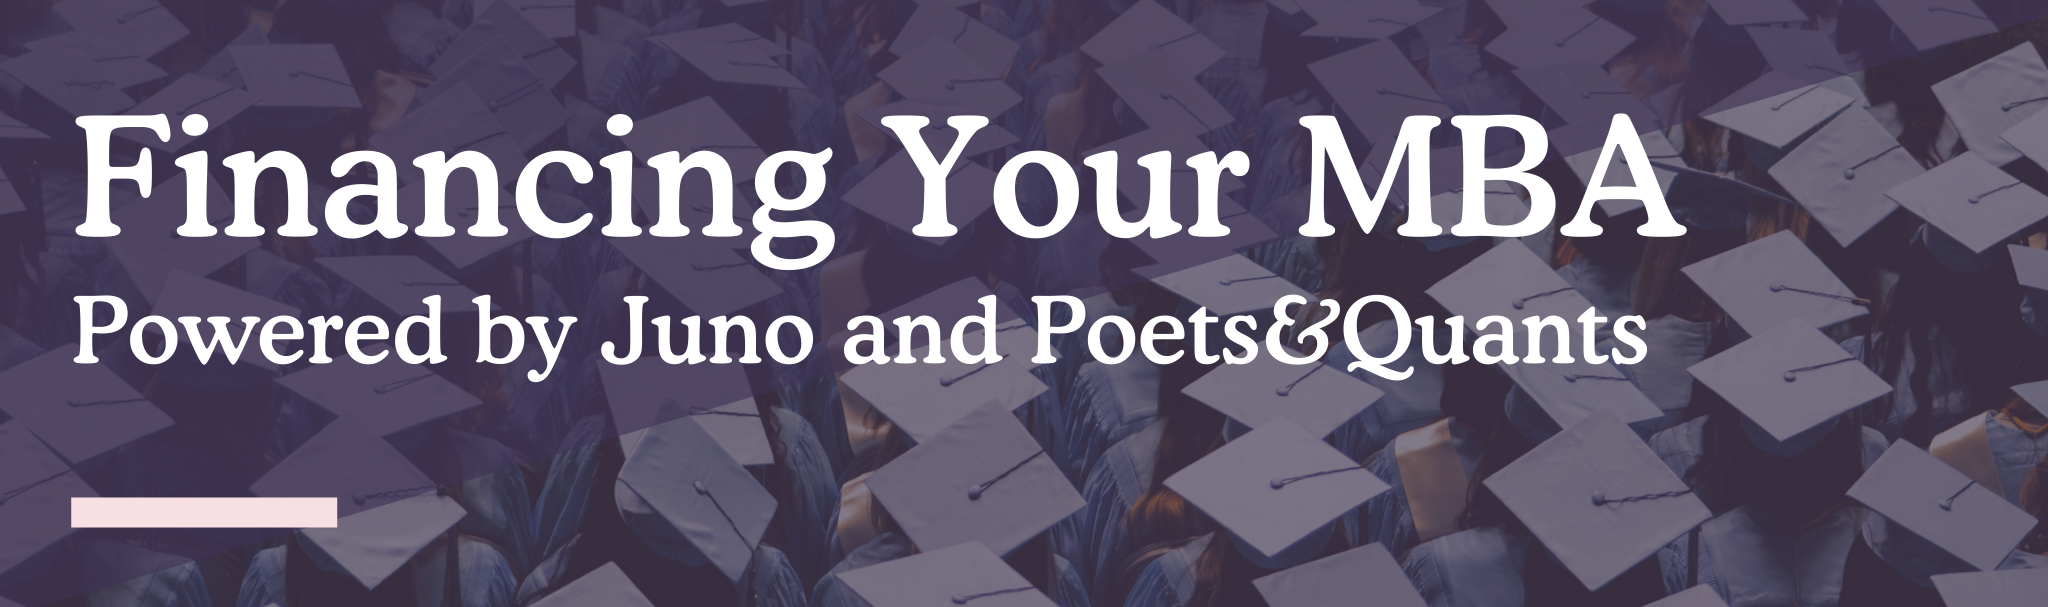 Financing Your MBA Powered By Juno and Poets&Quants